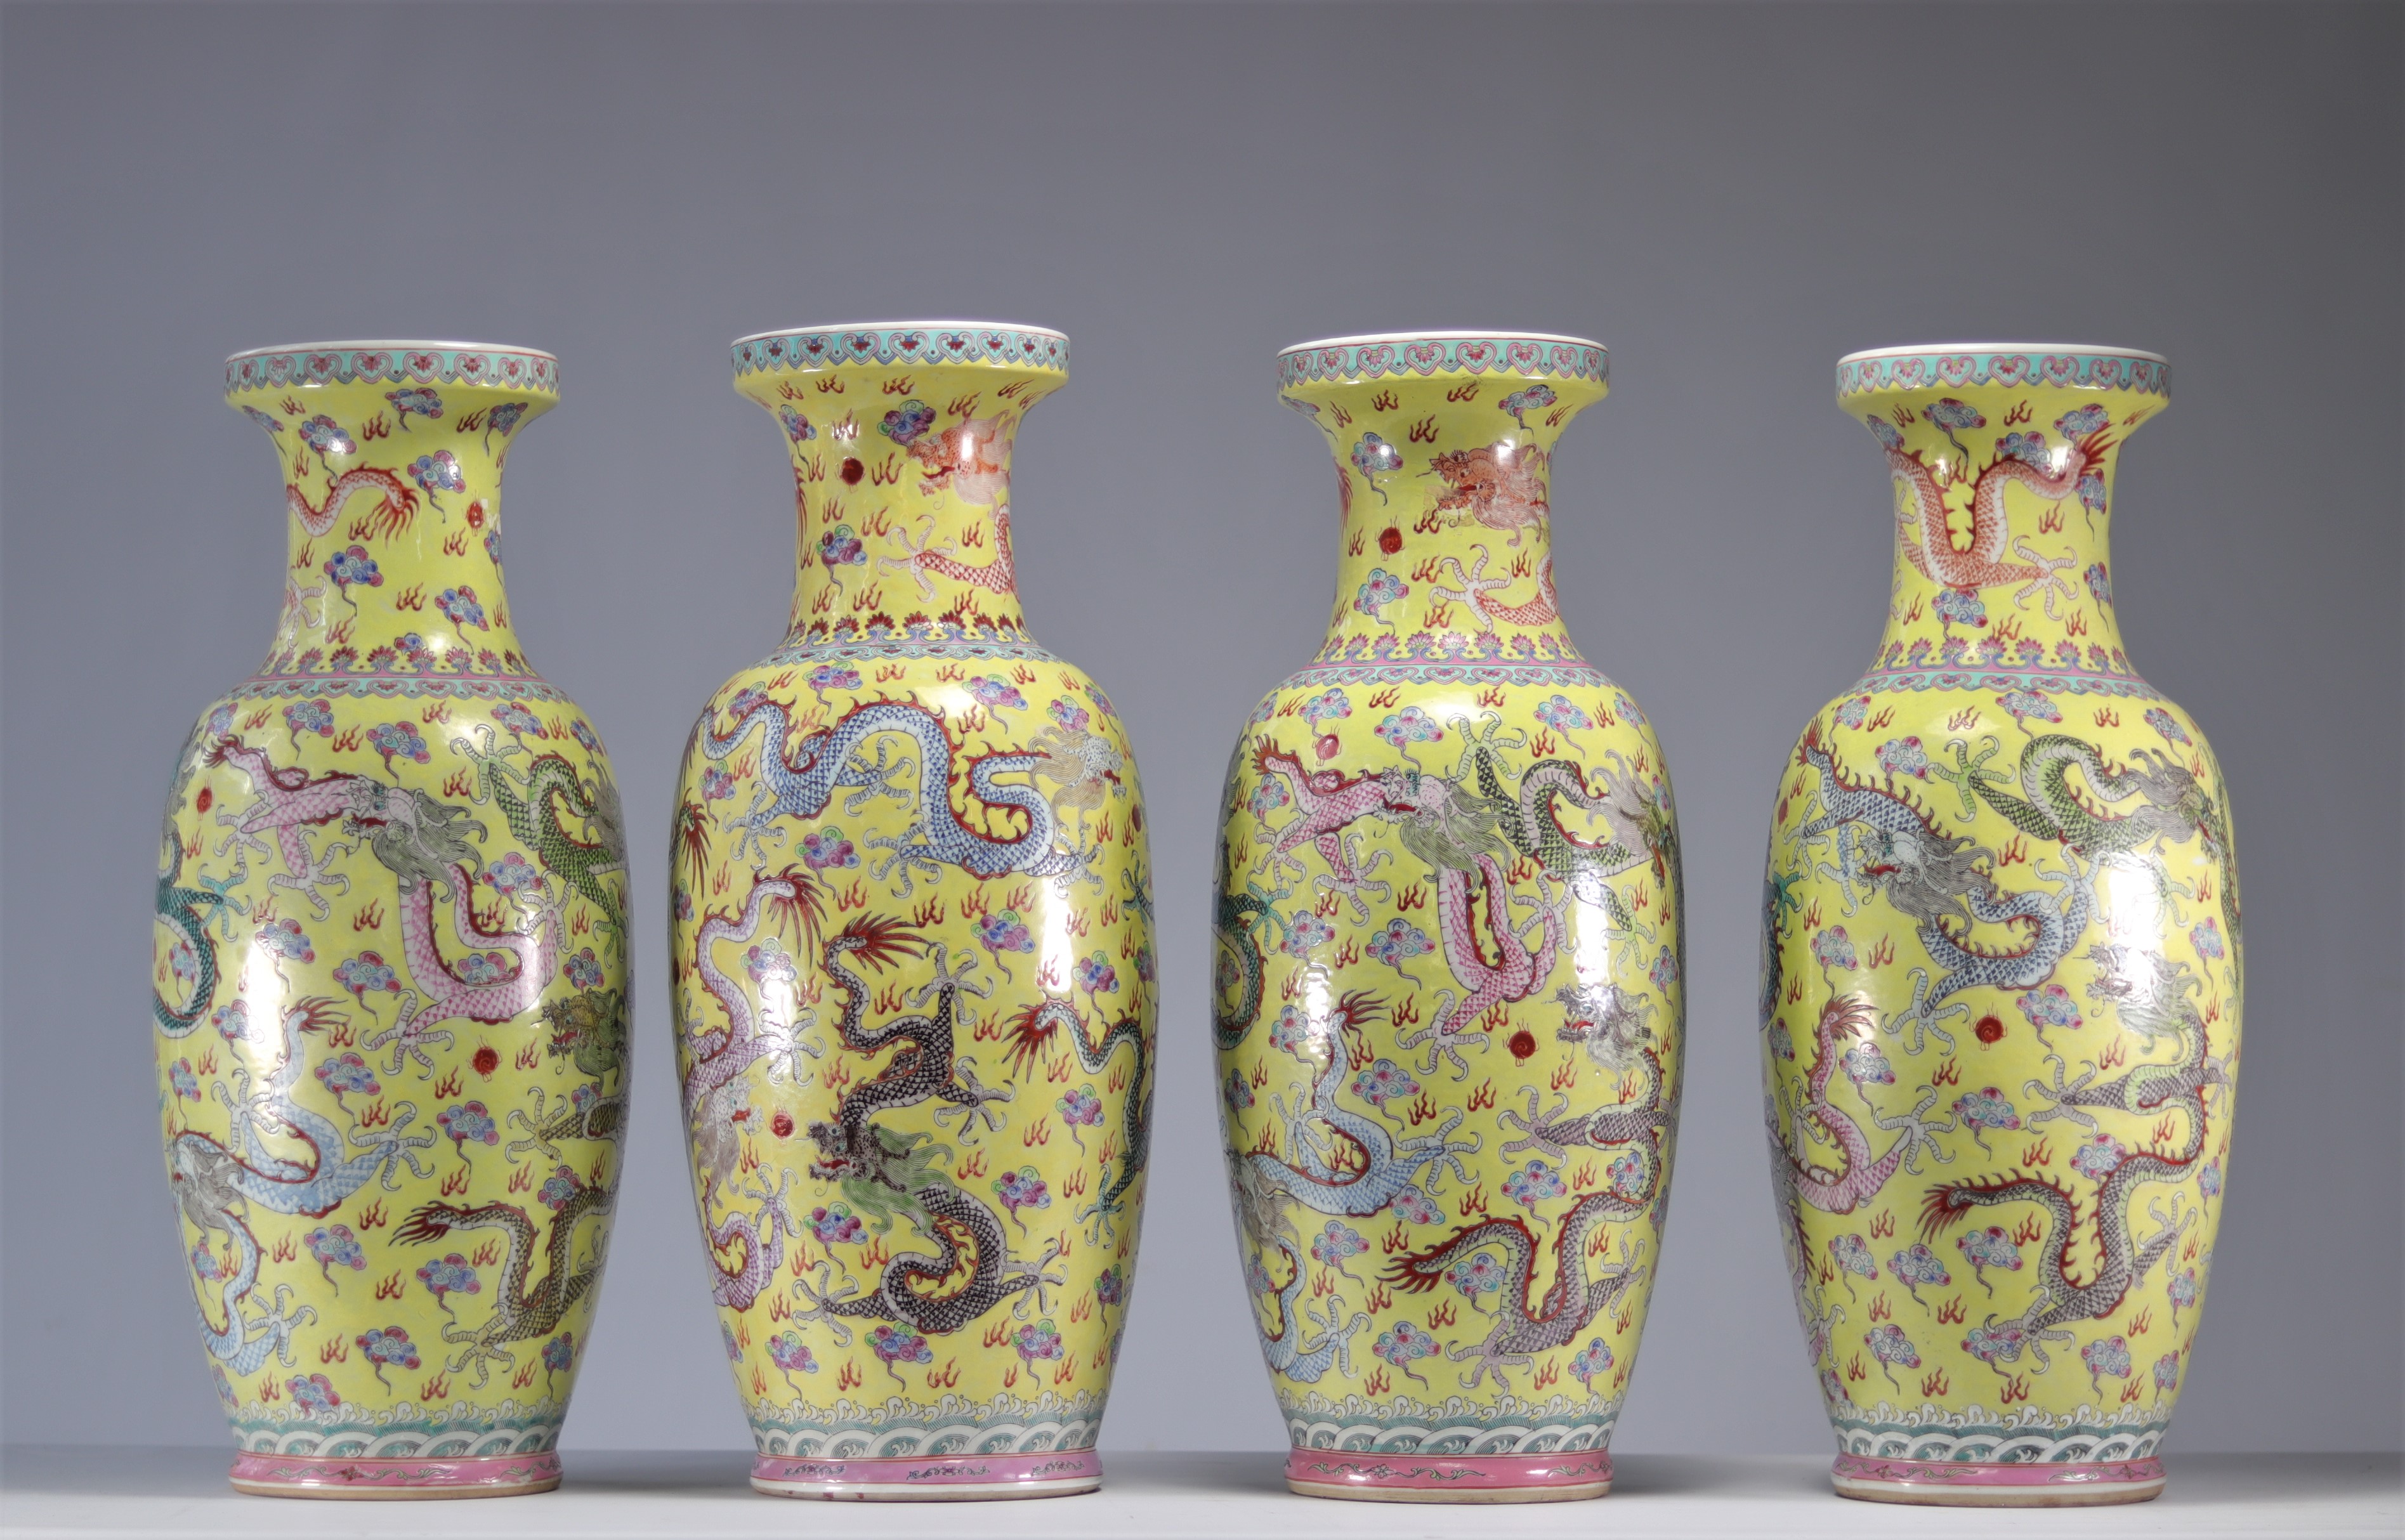 Vases (4) in Chinese famille rose porcelain decorated with dragons on a yellow background - Image 2 of 3